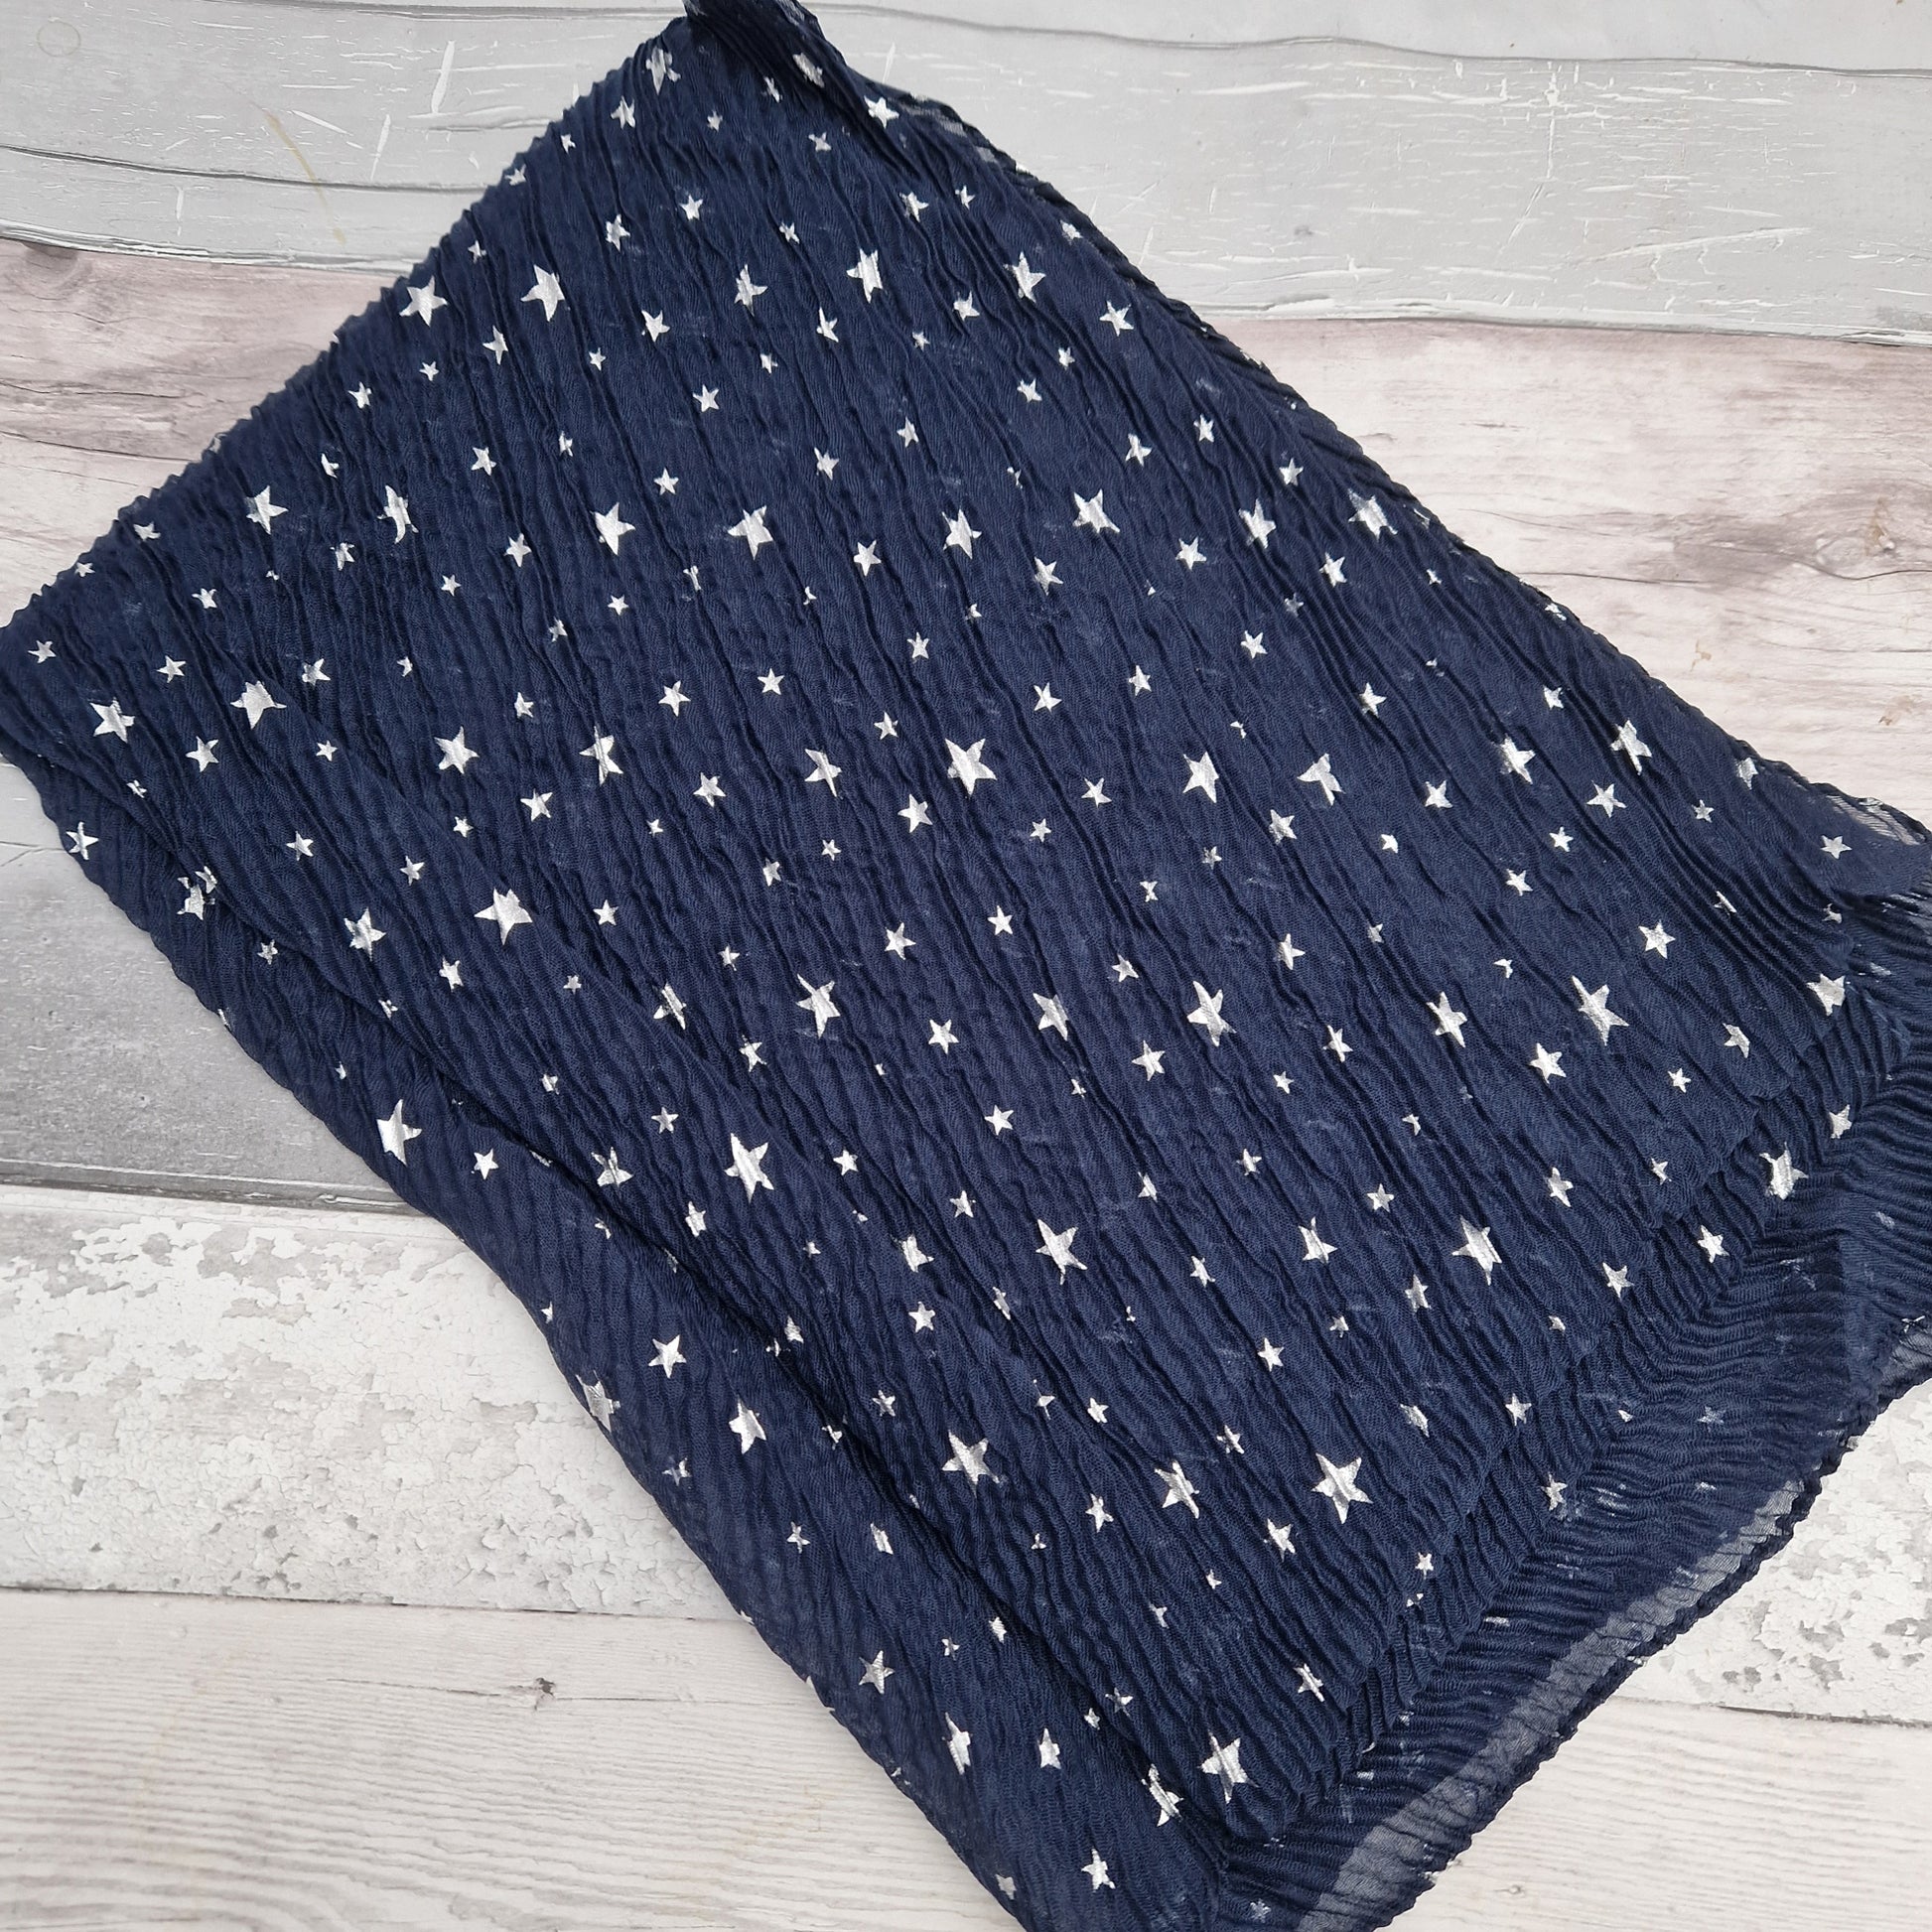 Navy crinkle finish scarf decorated with silver metallic stars.